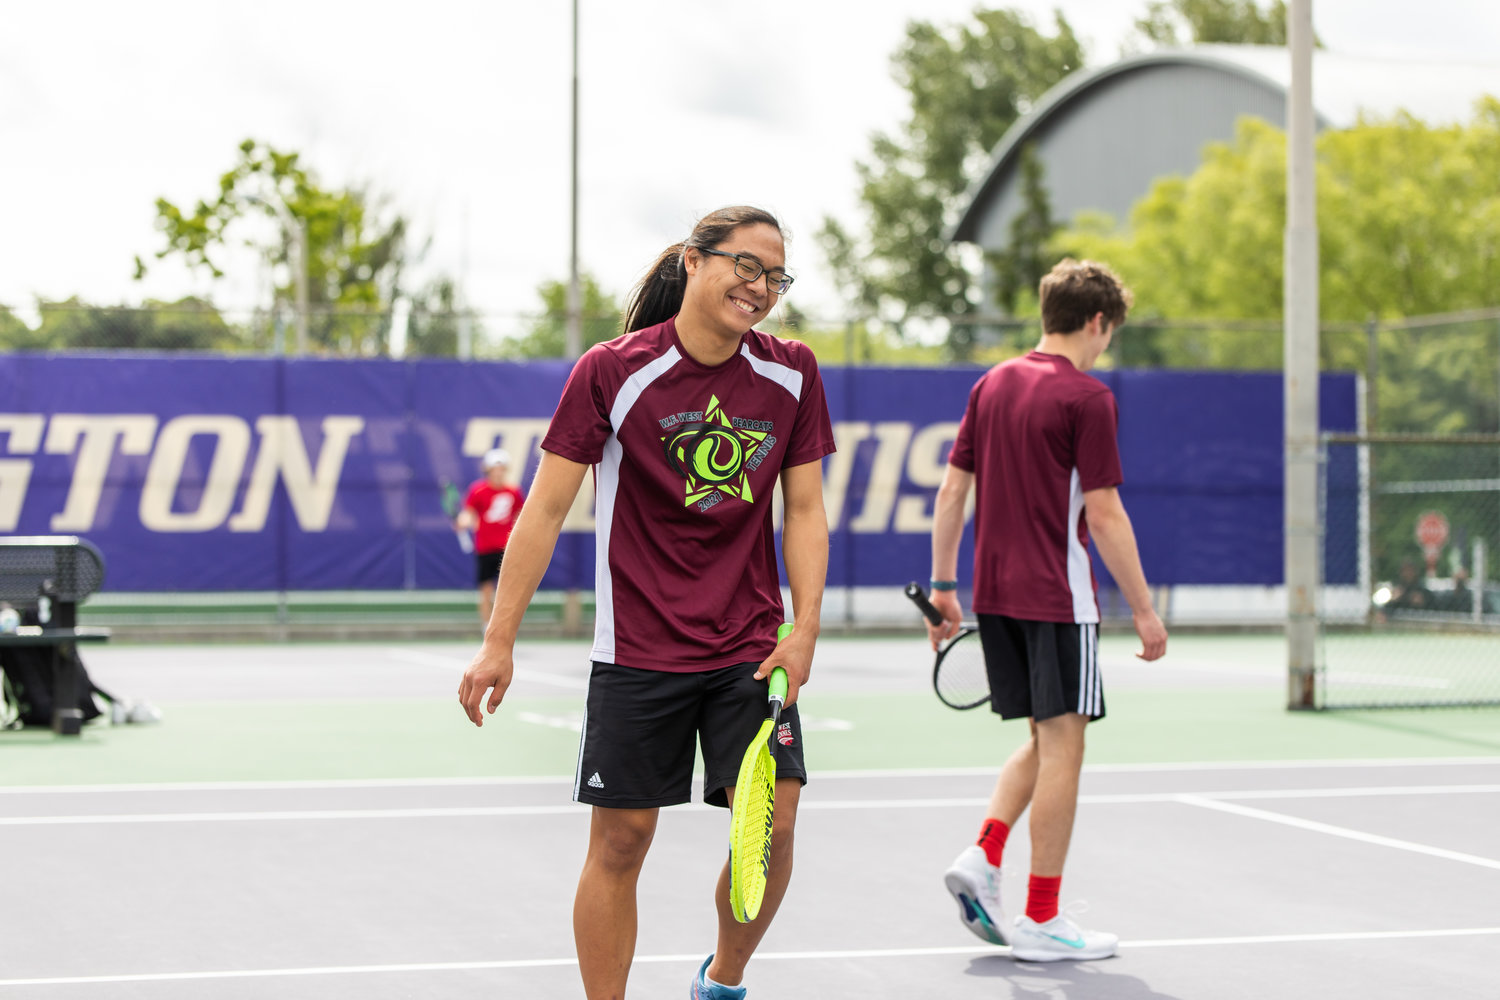 W.F. West's Joseph Chung laughs during the first set of the 2A boys' doubles tennis state competition on May 27, 2022.